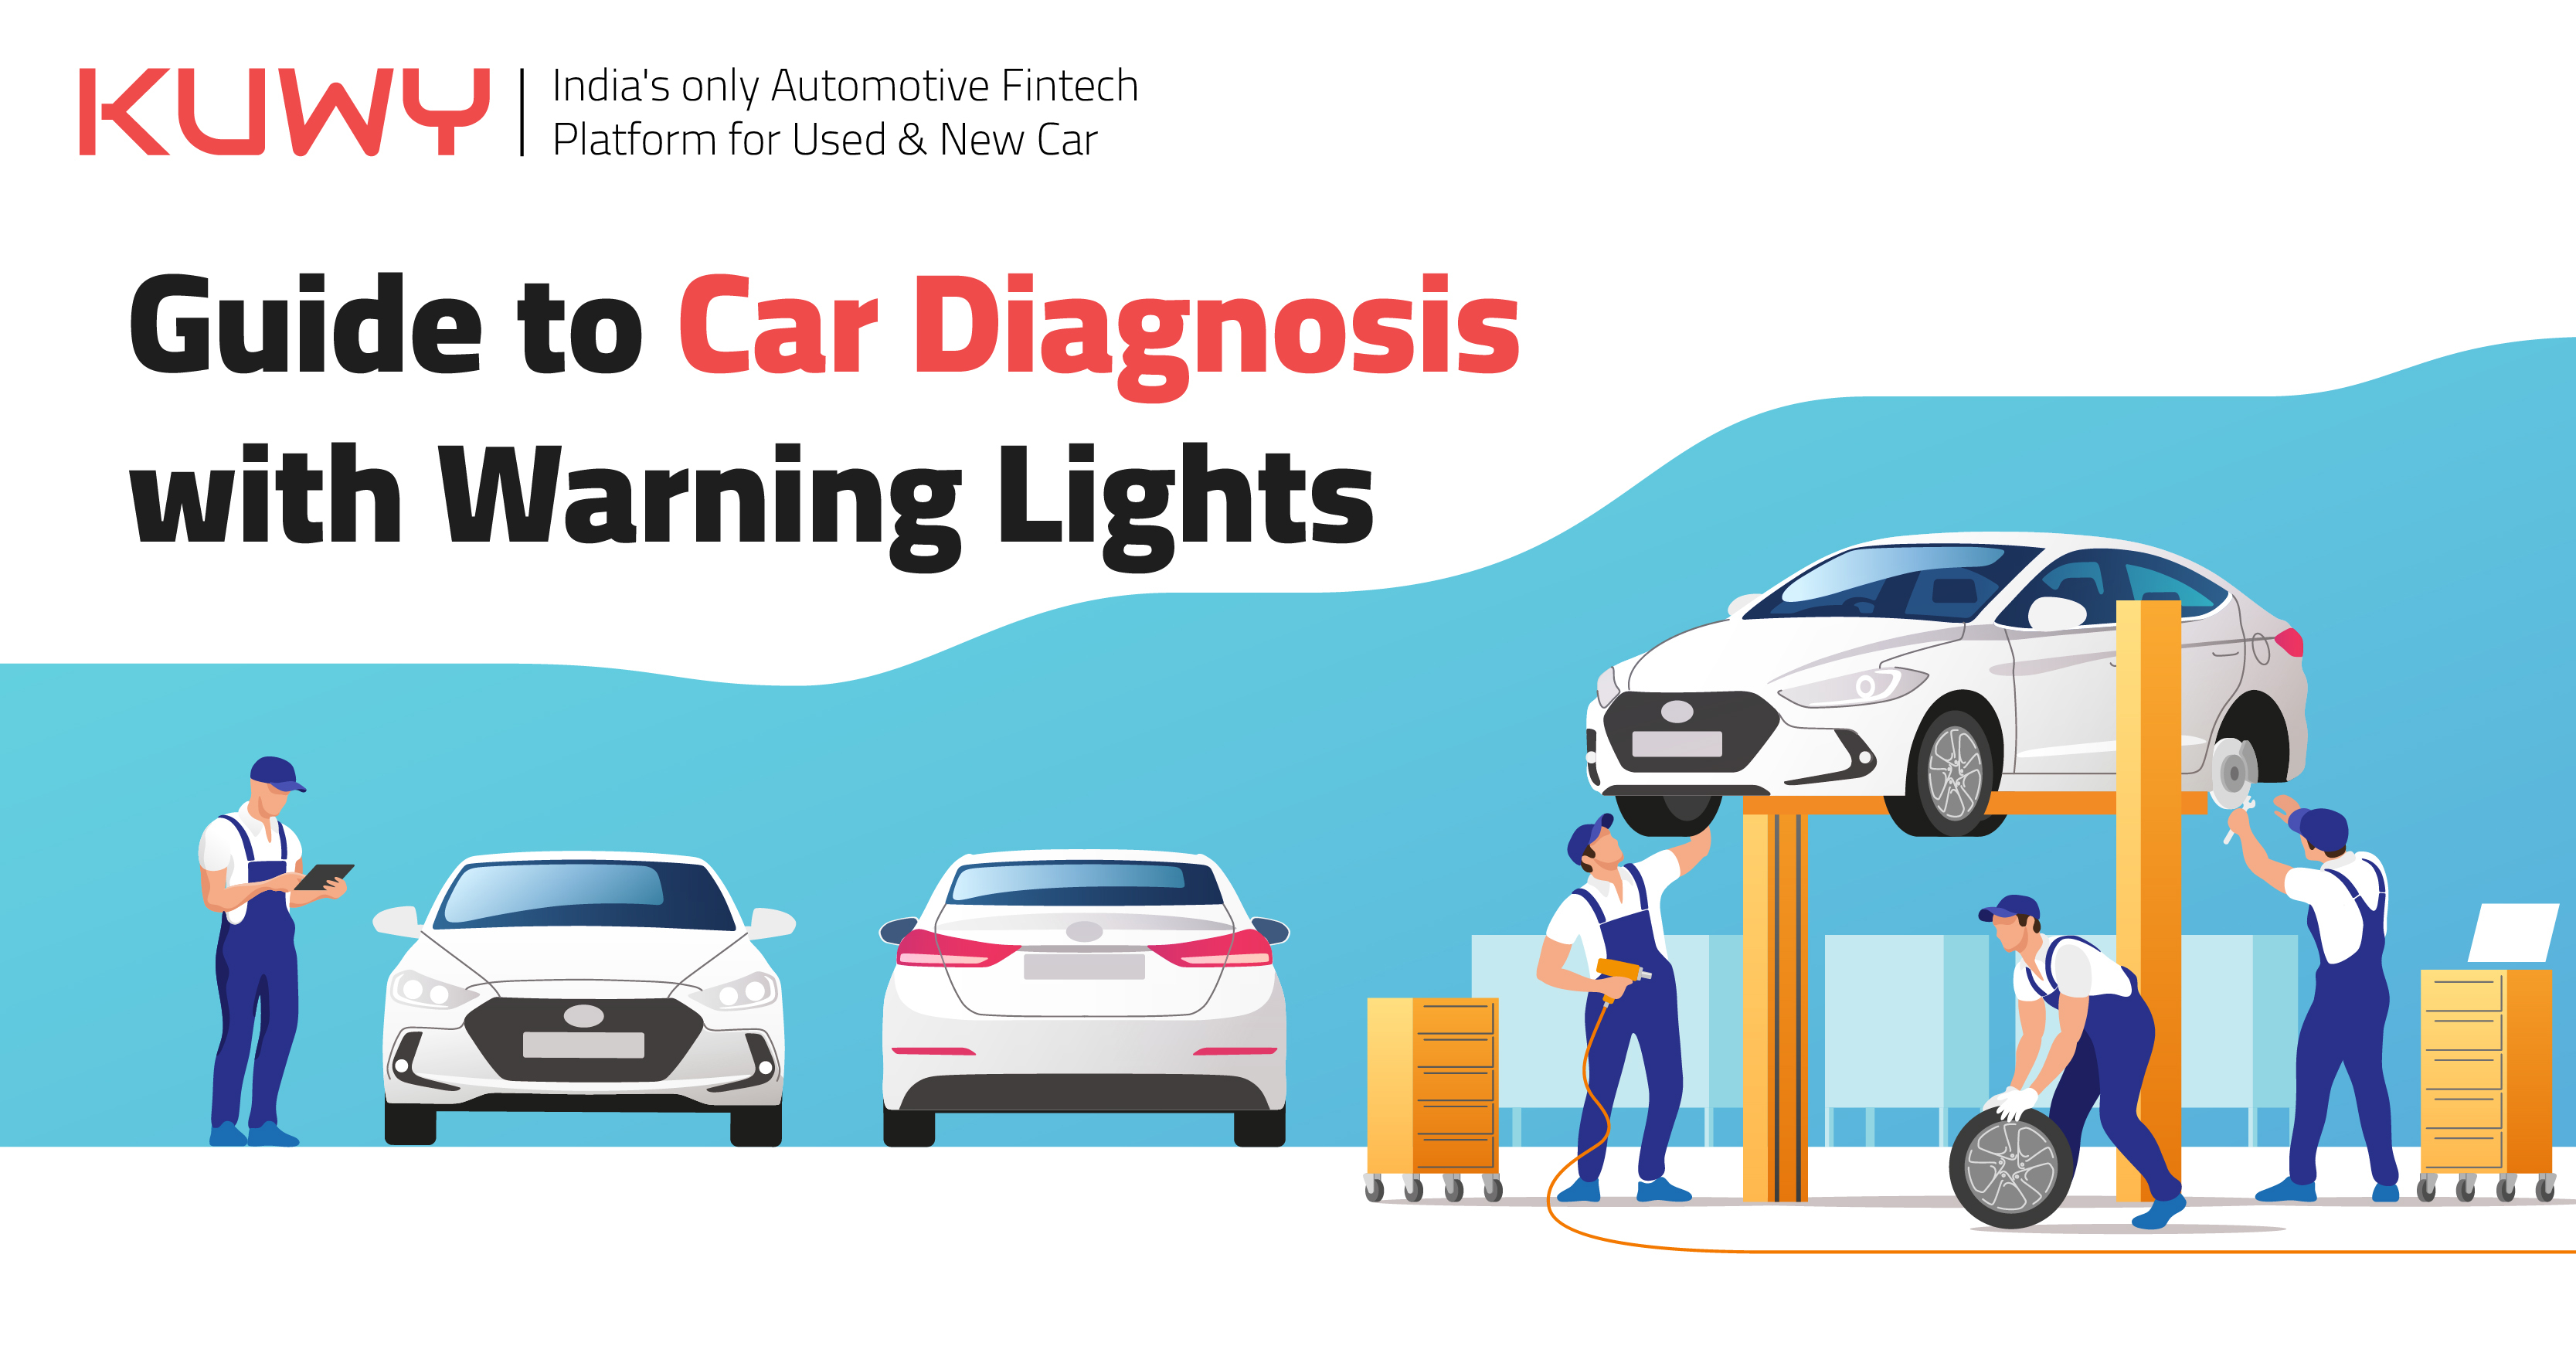 A Complete Guide to Car Diagnosis with Warning Lights